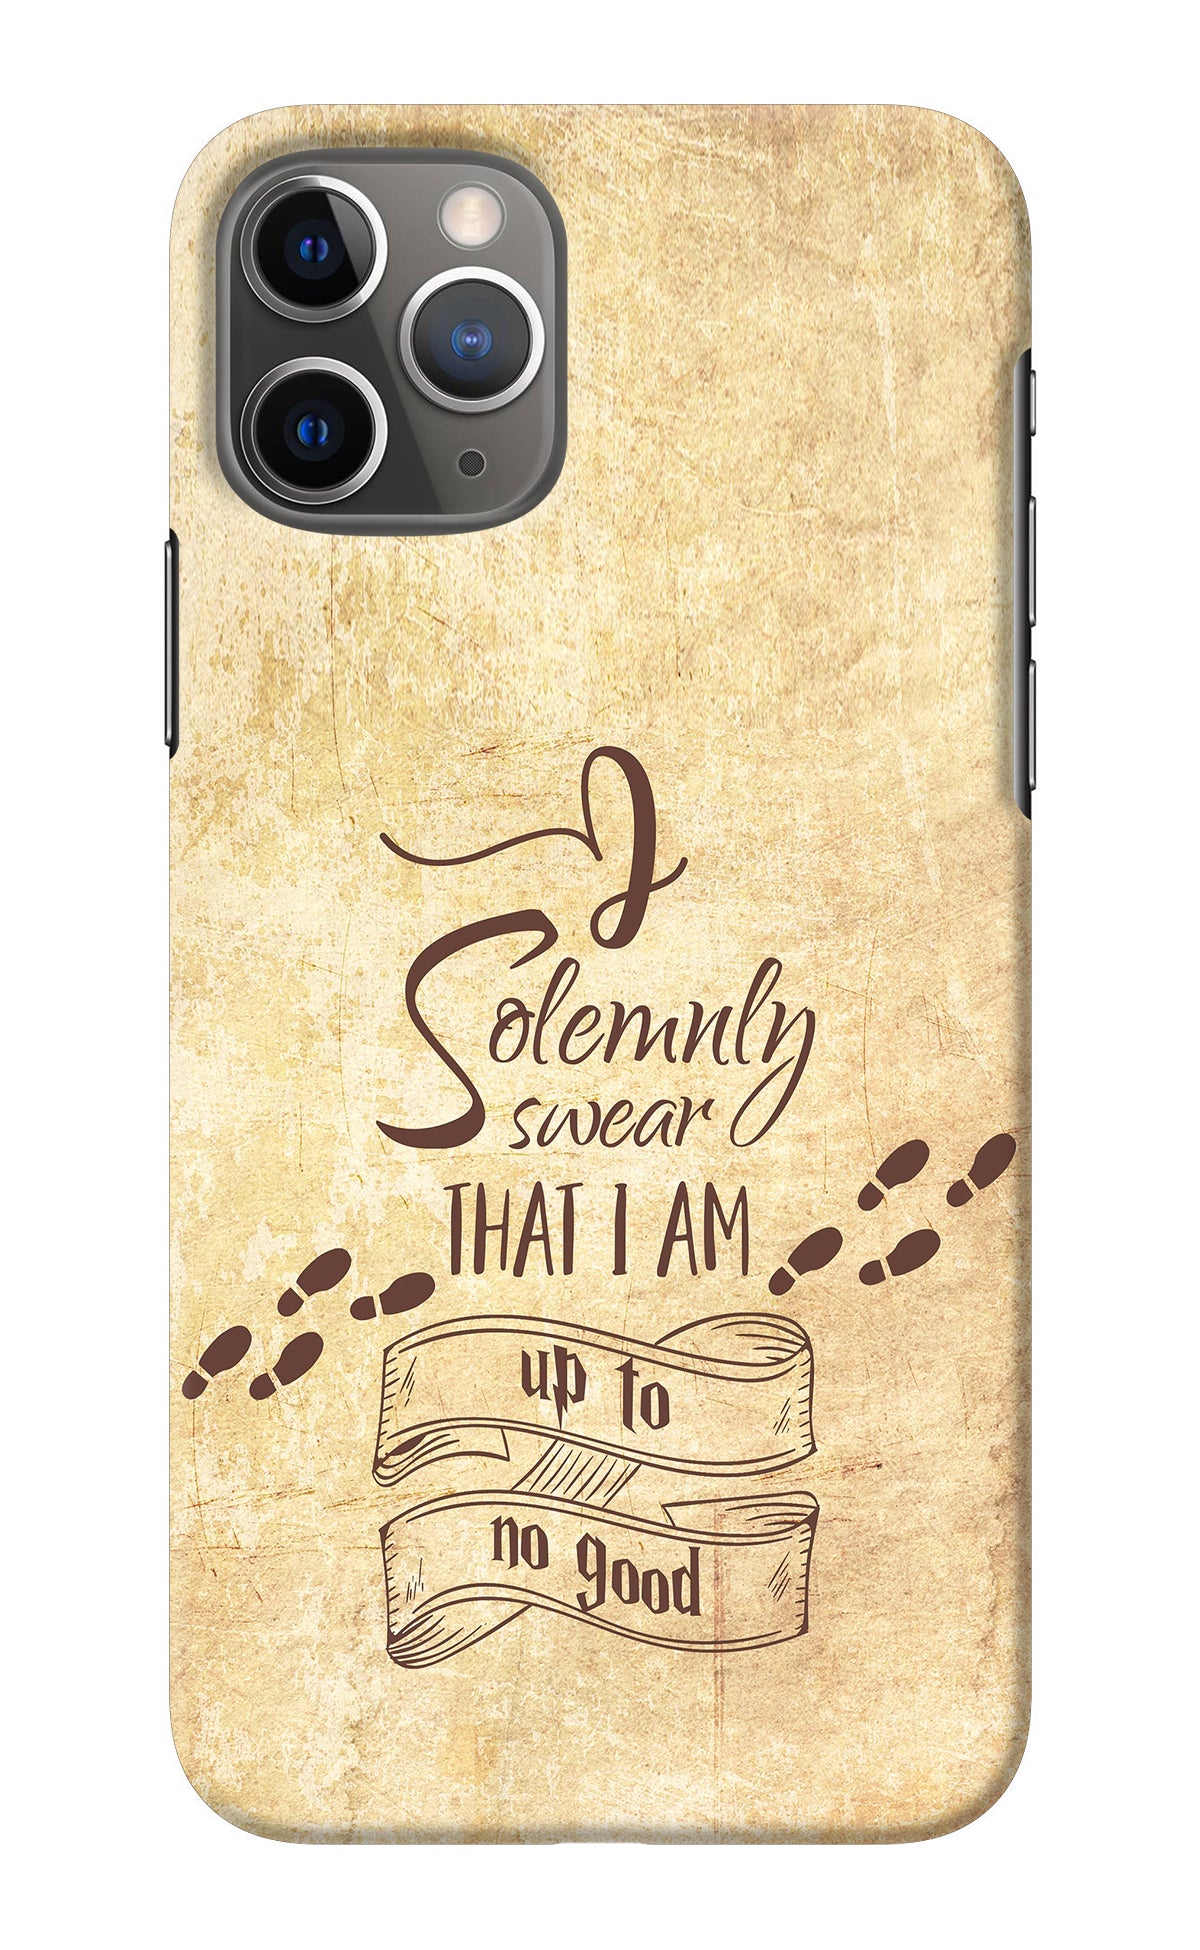 I Solemnly swear that i up to no good iPhone 11 Pro Max Back Cover